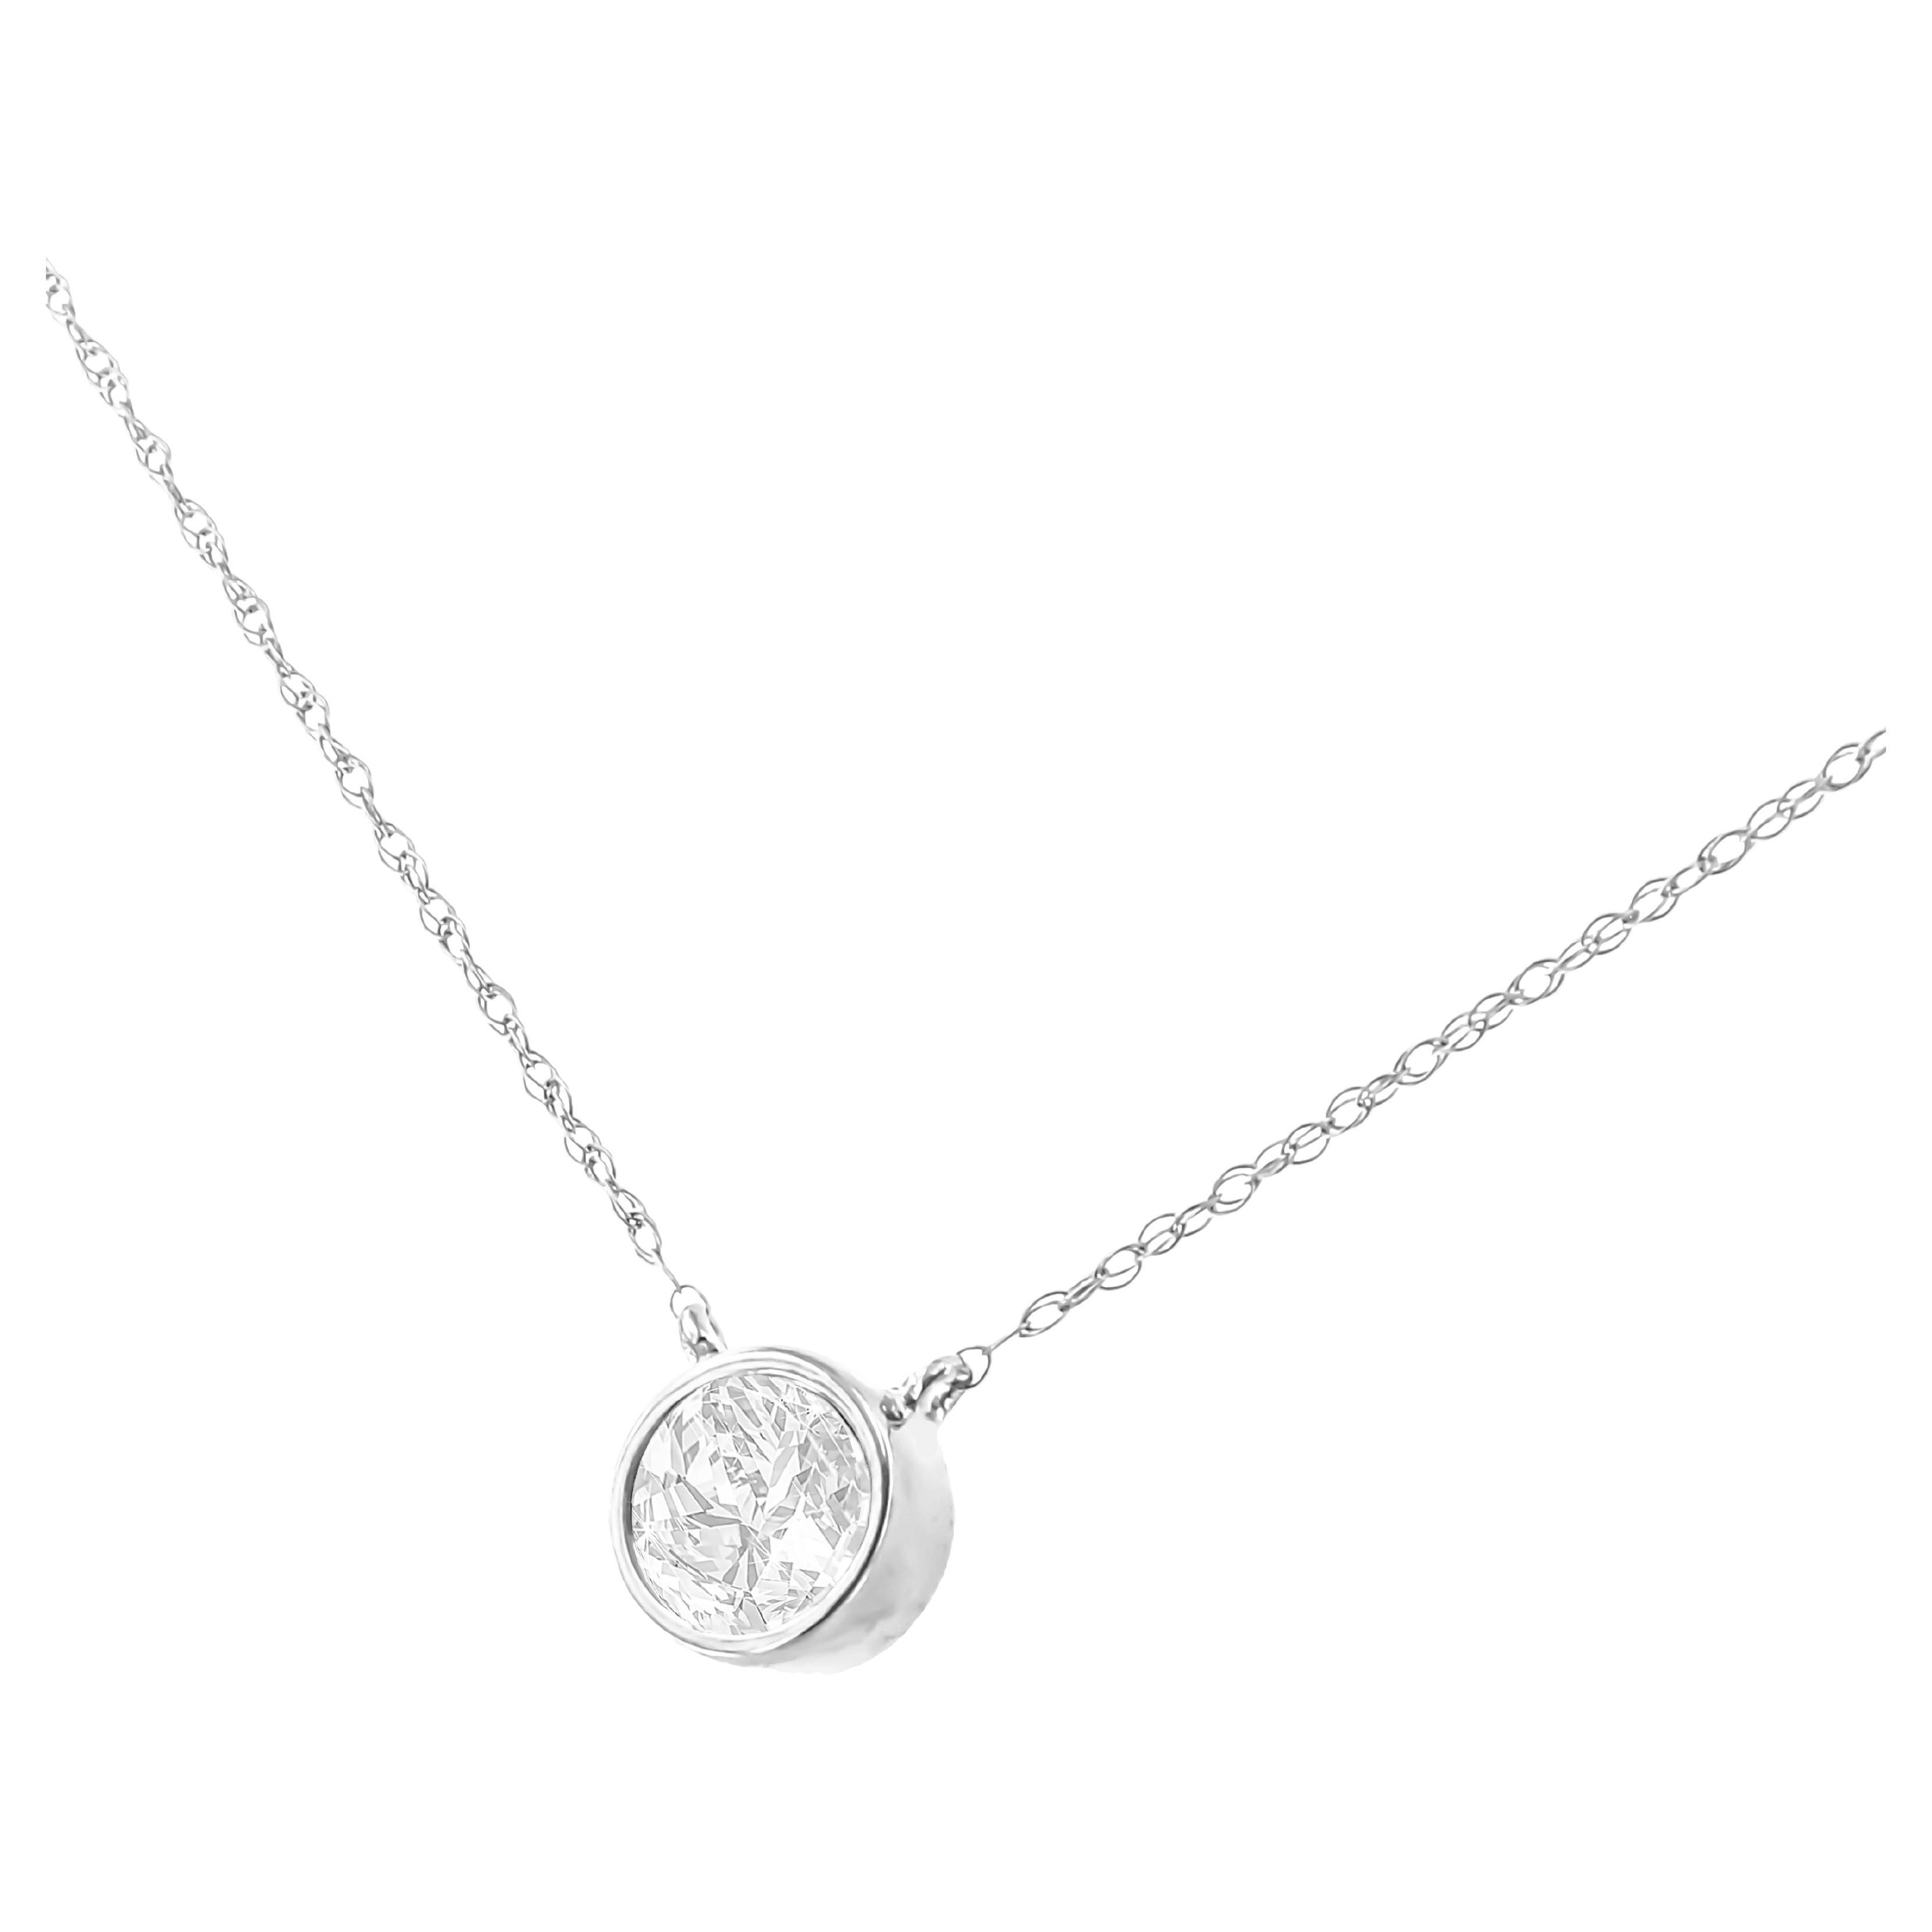 AGS Certified 10K White Gold 1/3 Carat Diamond Adjustable Pendant Necklace For Sale